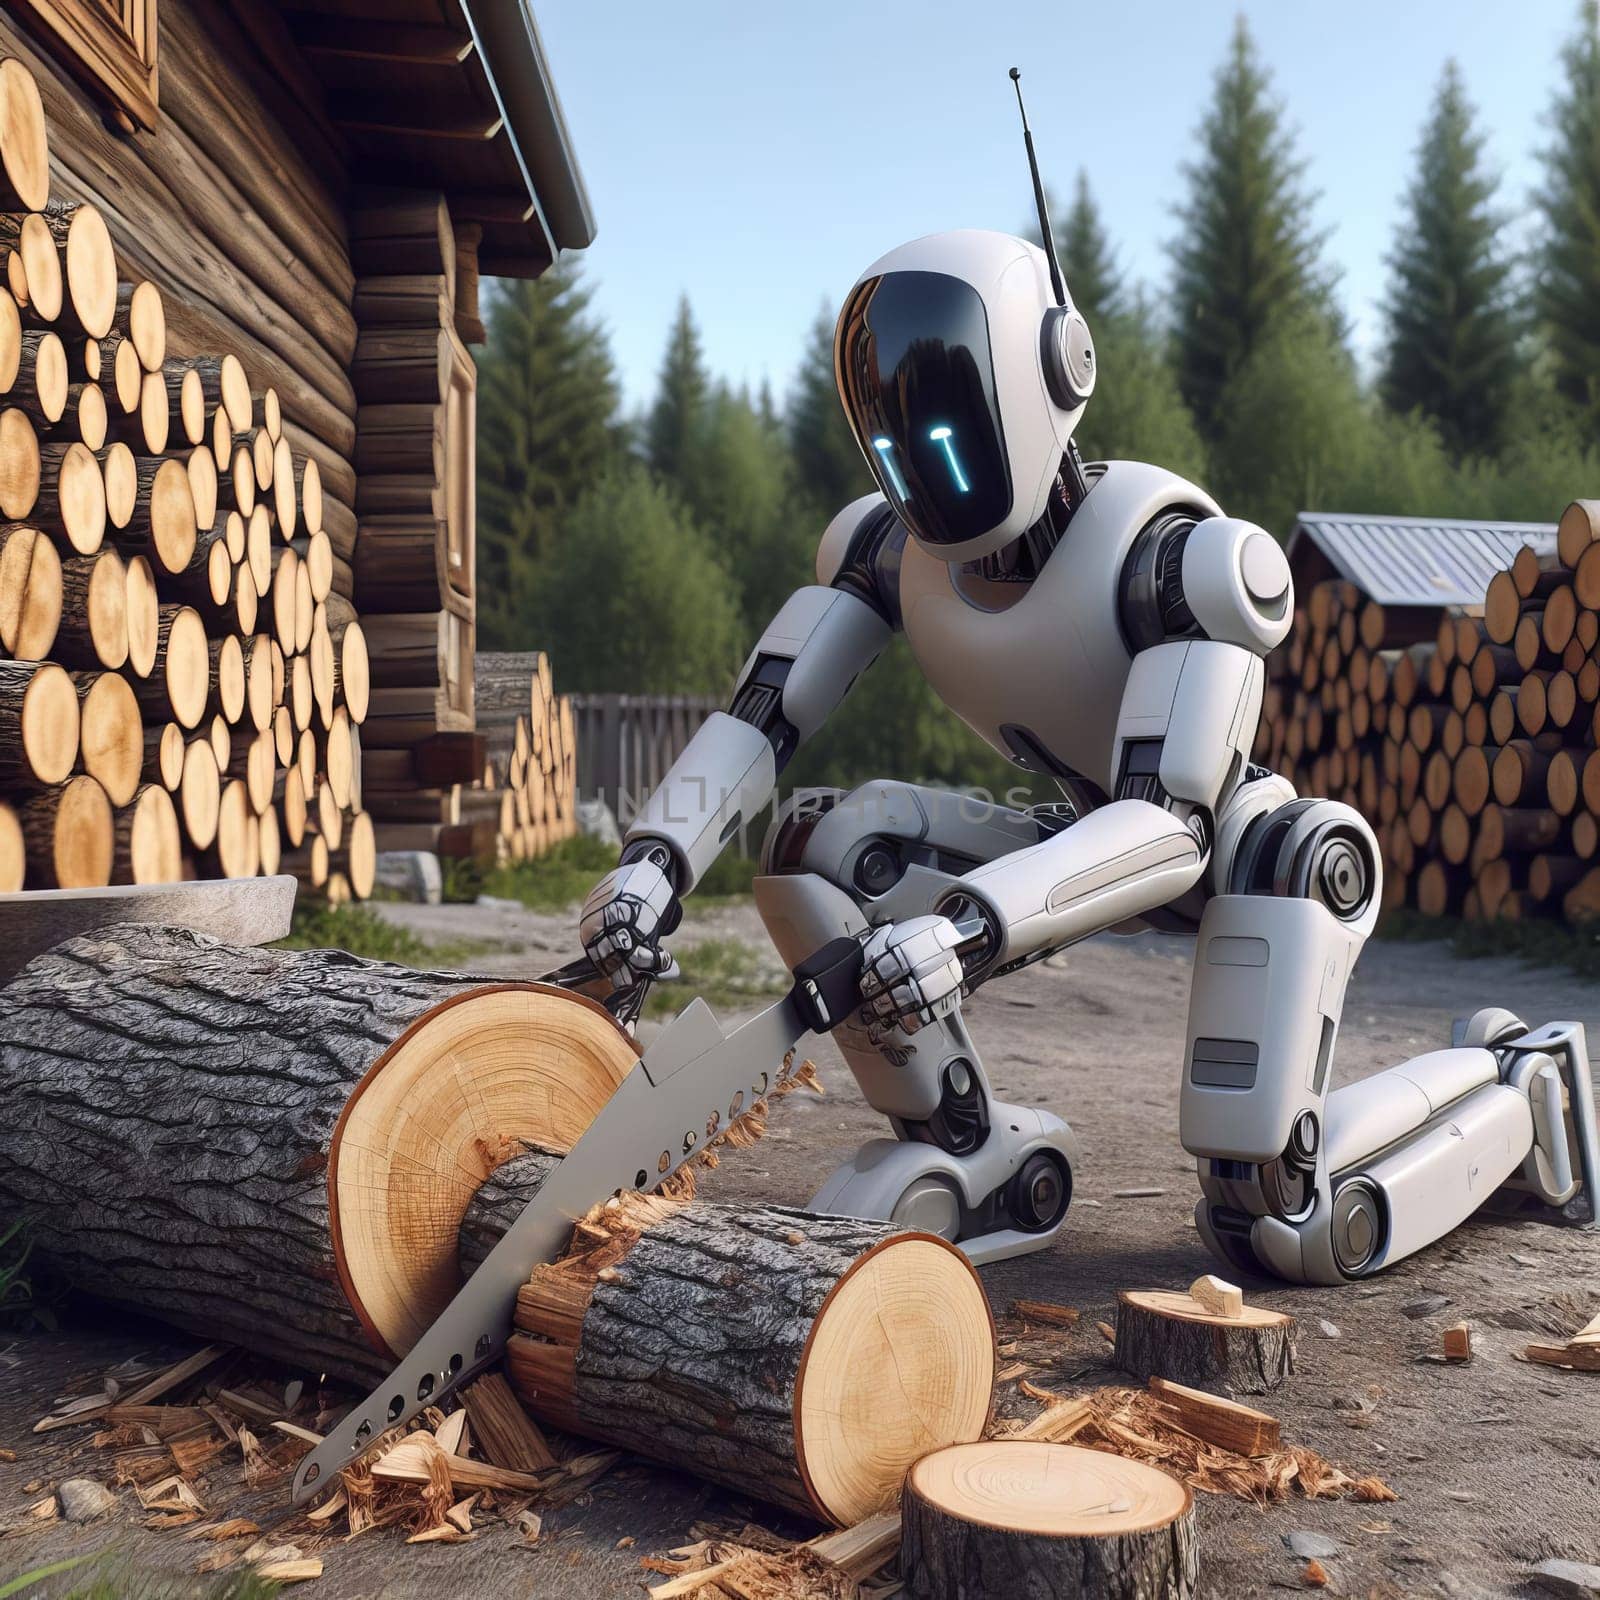 A modern robot cutting wood logs outside a wooden cabin, showcasing technology meeting traditional woodwork. by sfinks